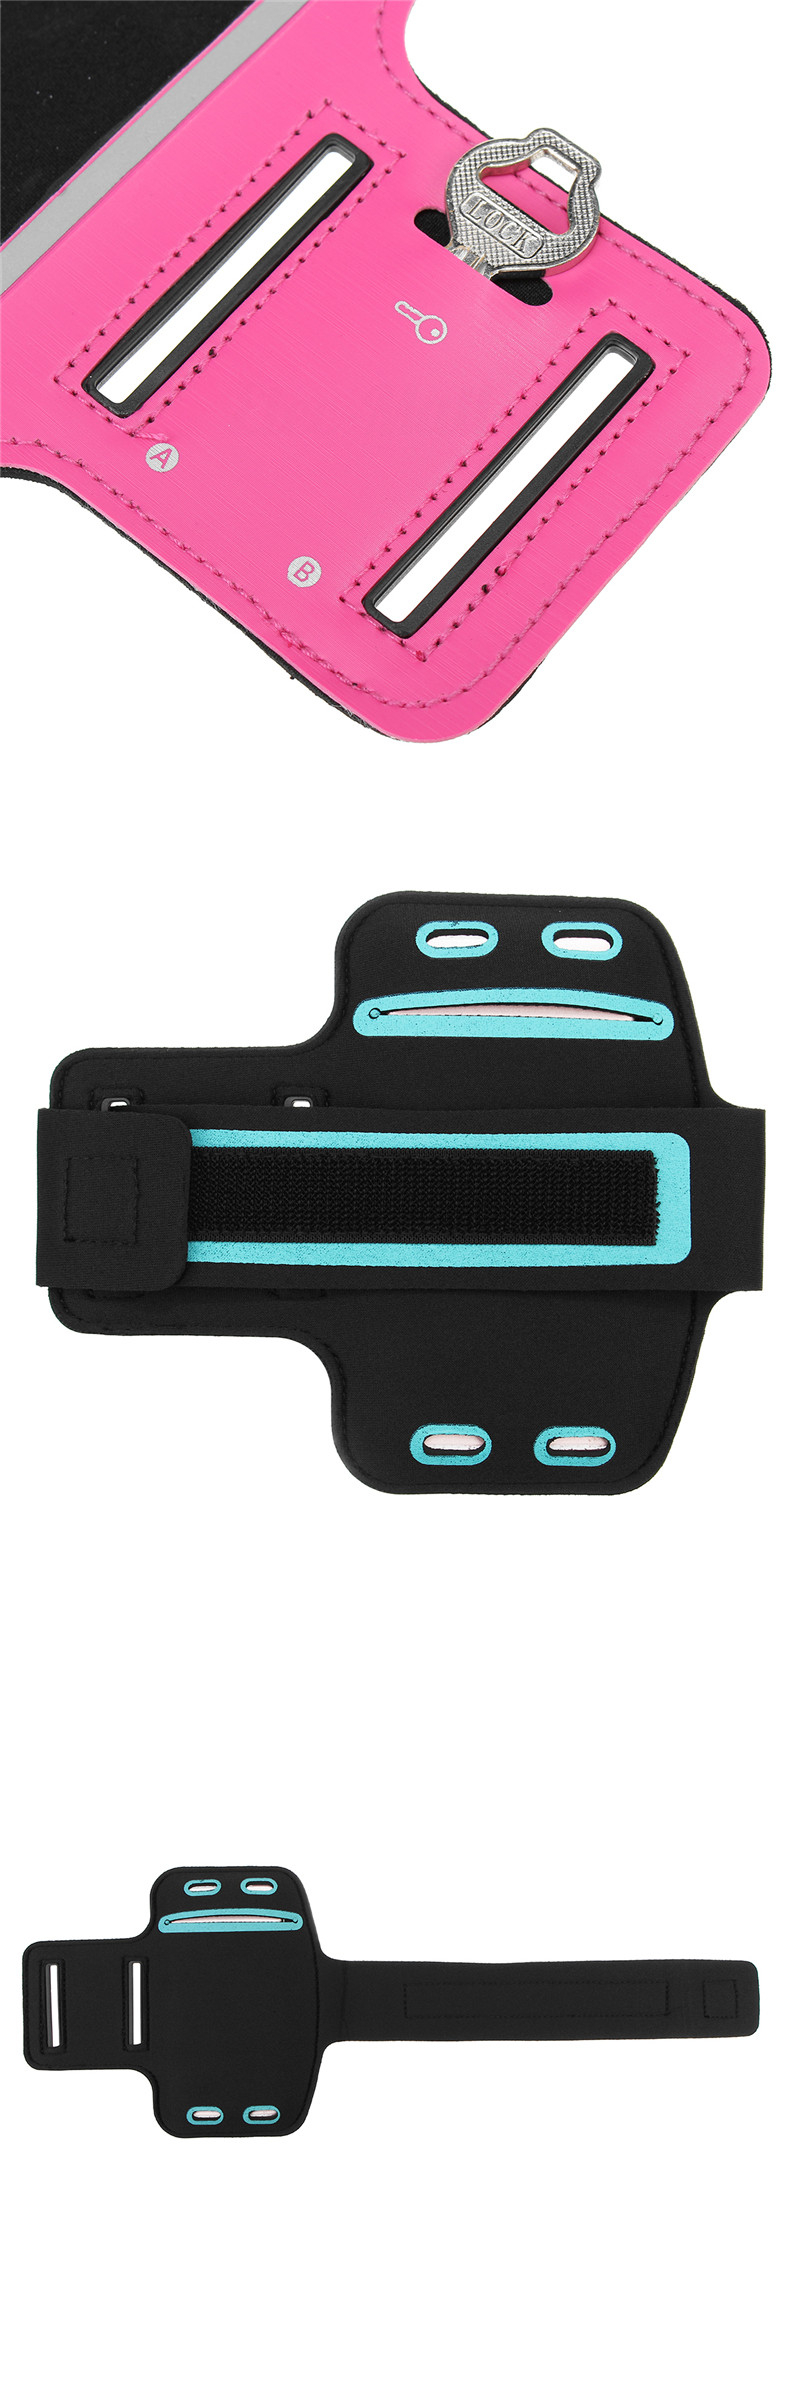 IPReereg-Waterproof-Sports-Armband-Case-Cover-Running-Gym-Touch-Screen-Holder-Pouch-for-iPhone-7-1195593-7